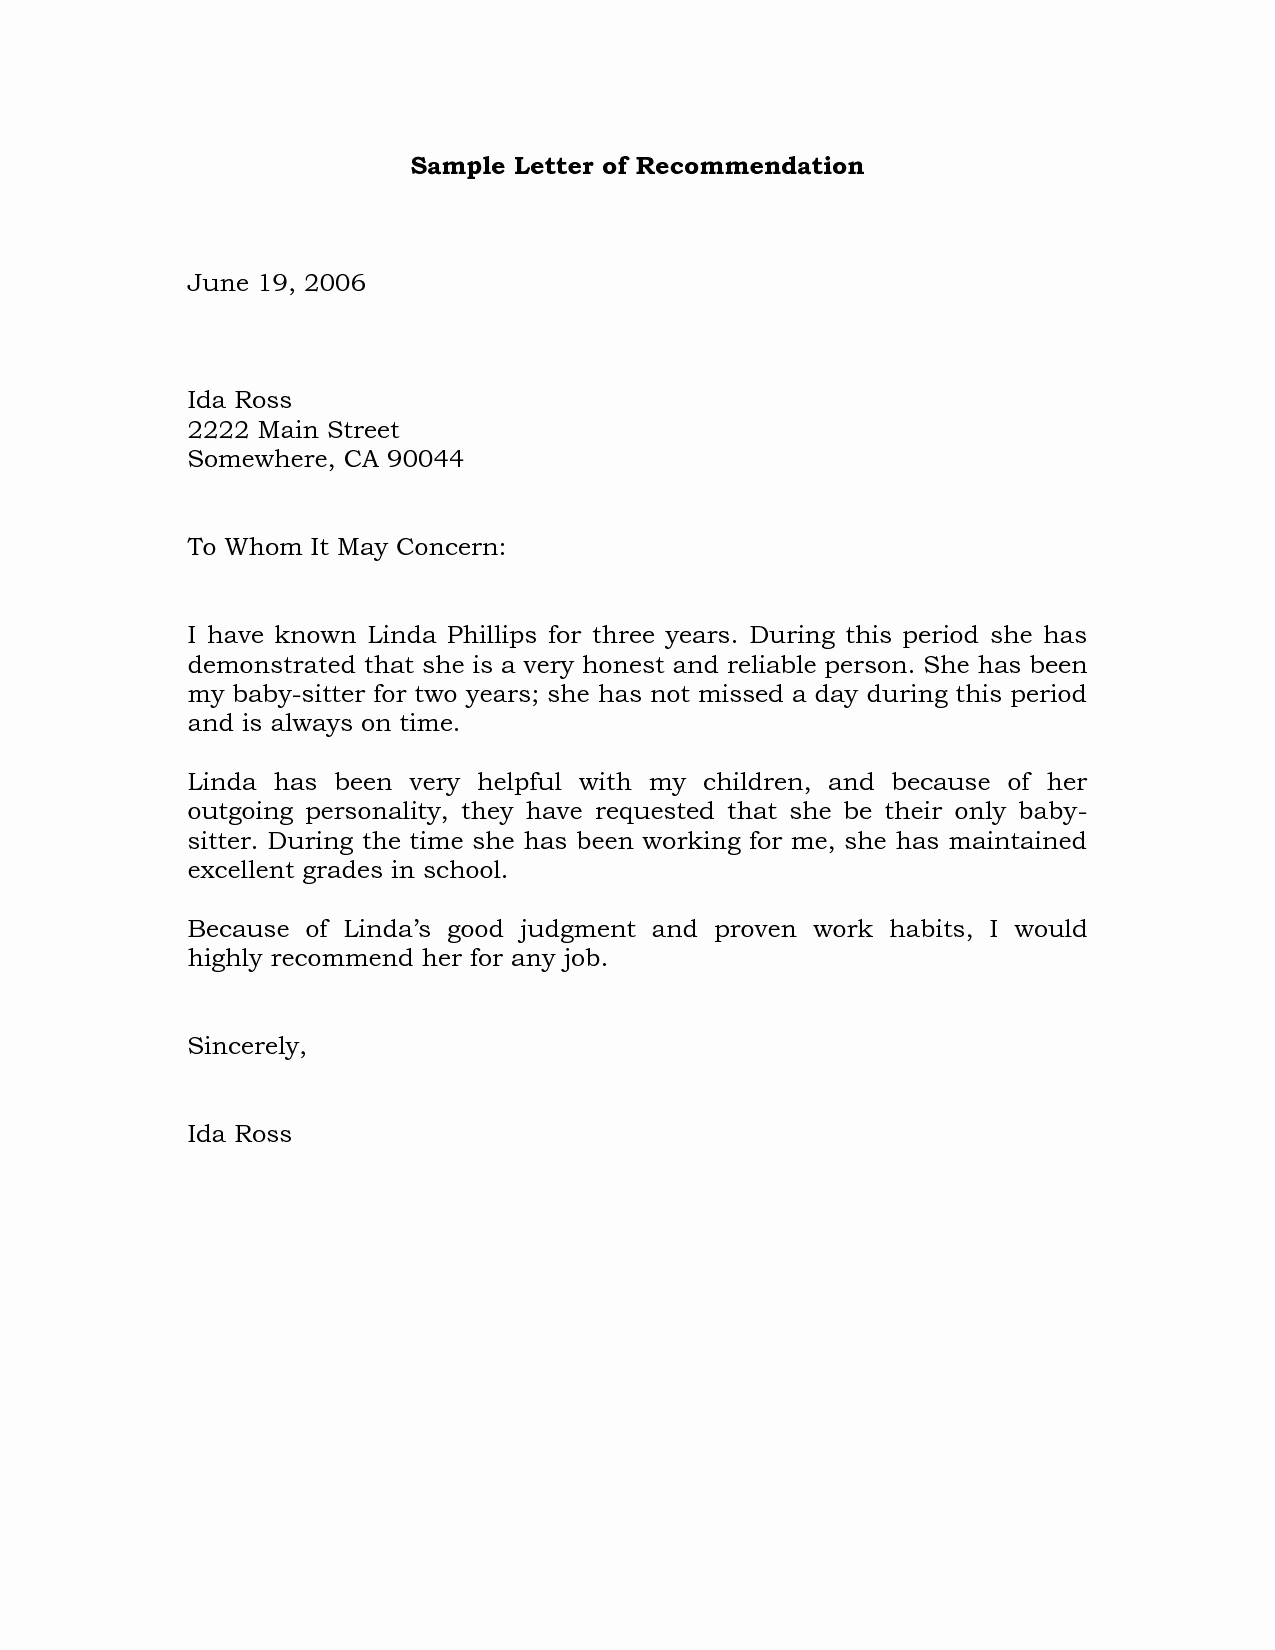 Personal Recommendation Letter Sample Best Of Sample Re Mendation Letter Example